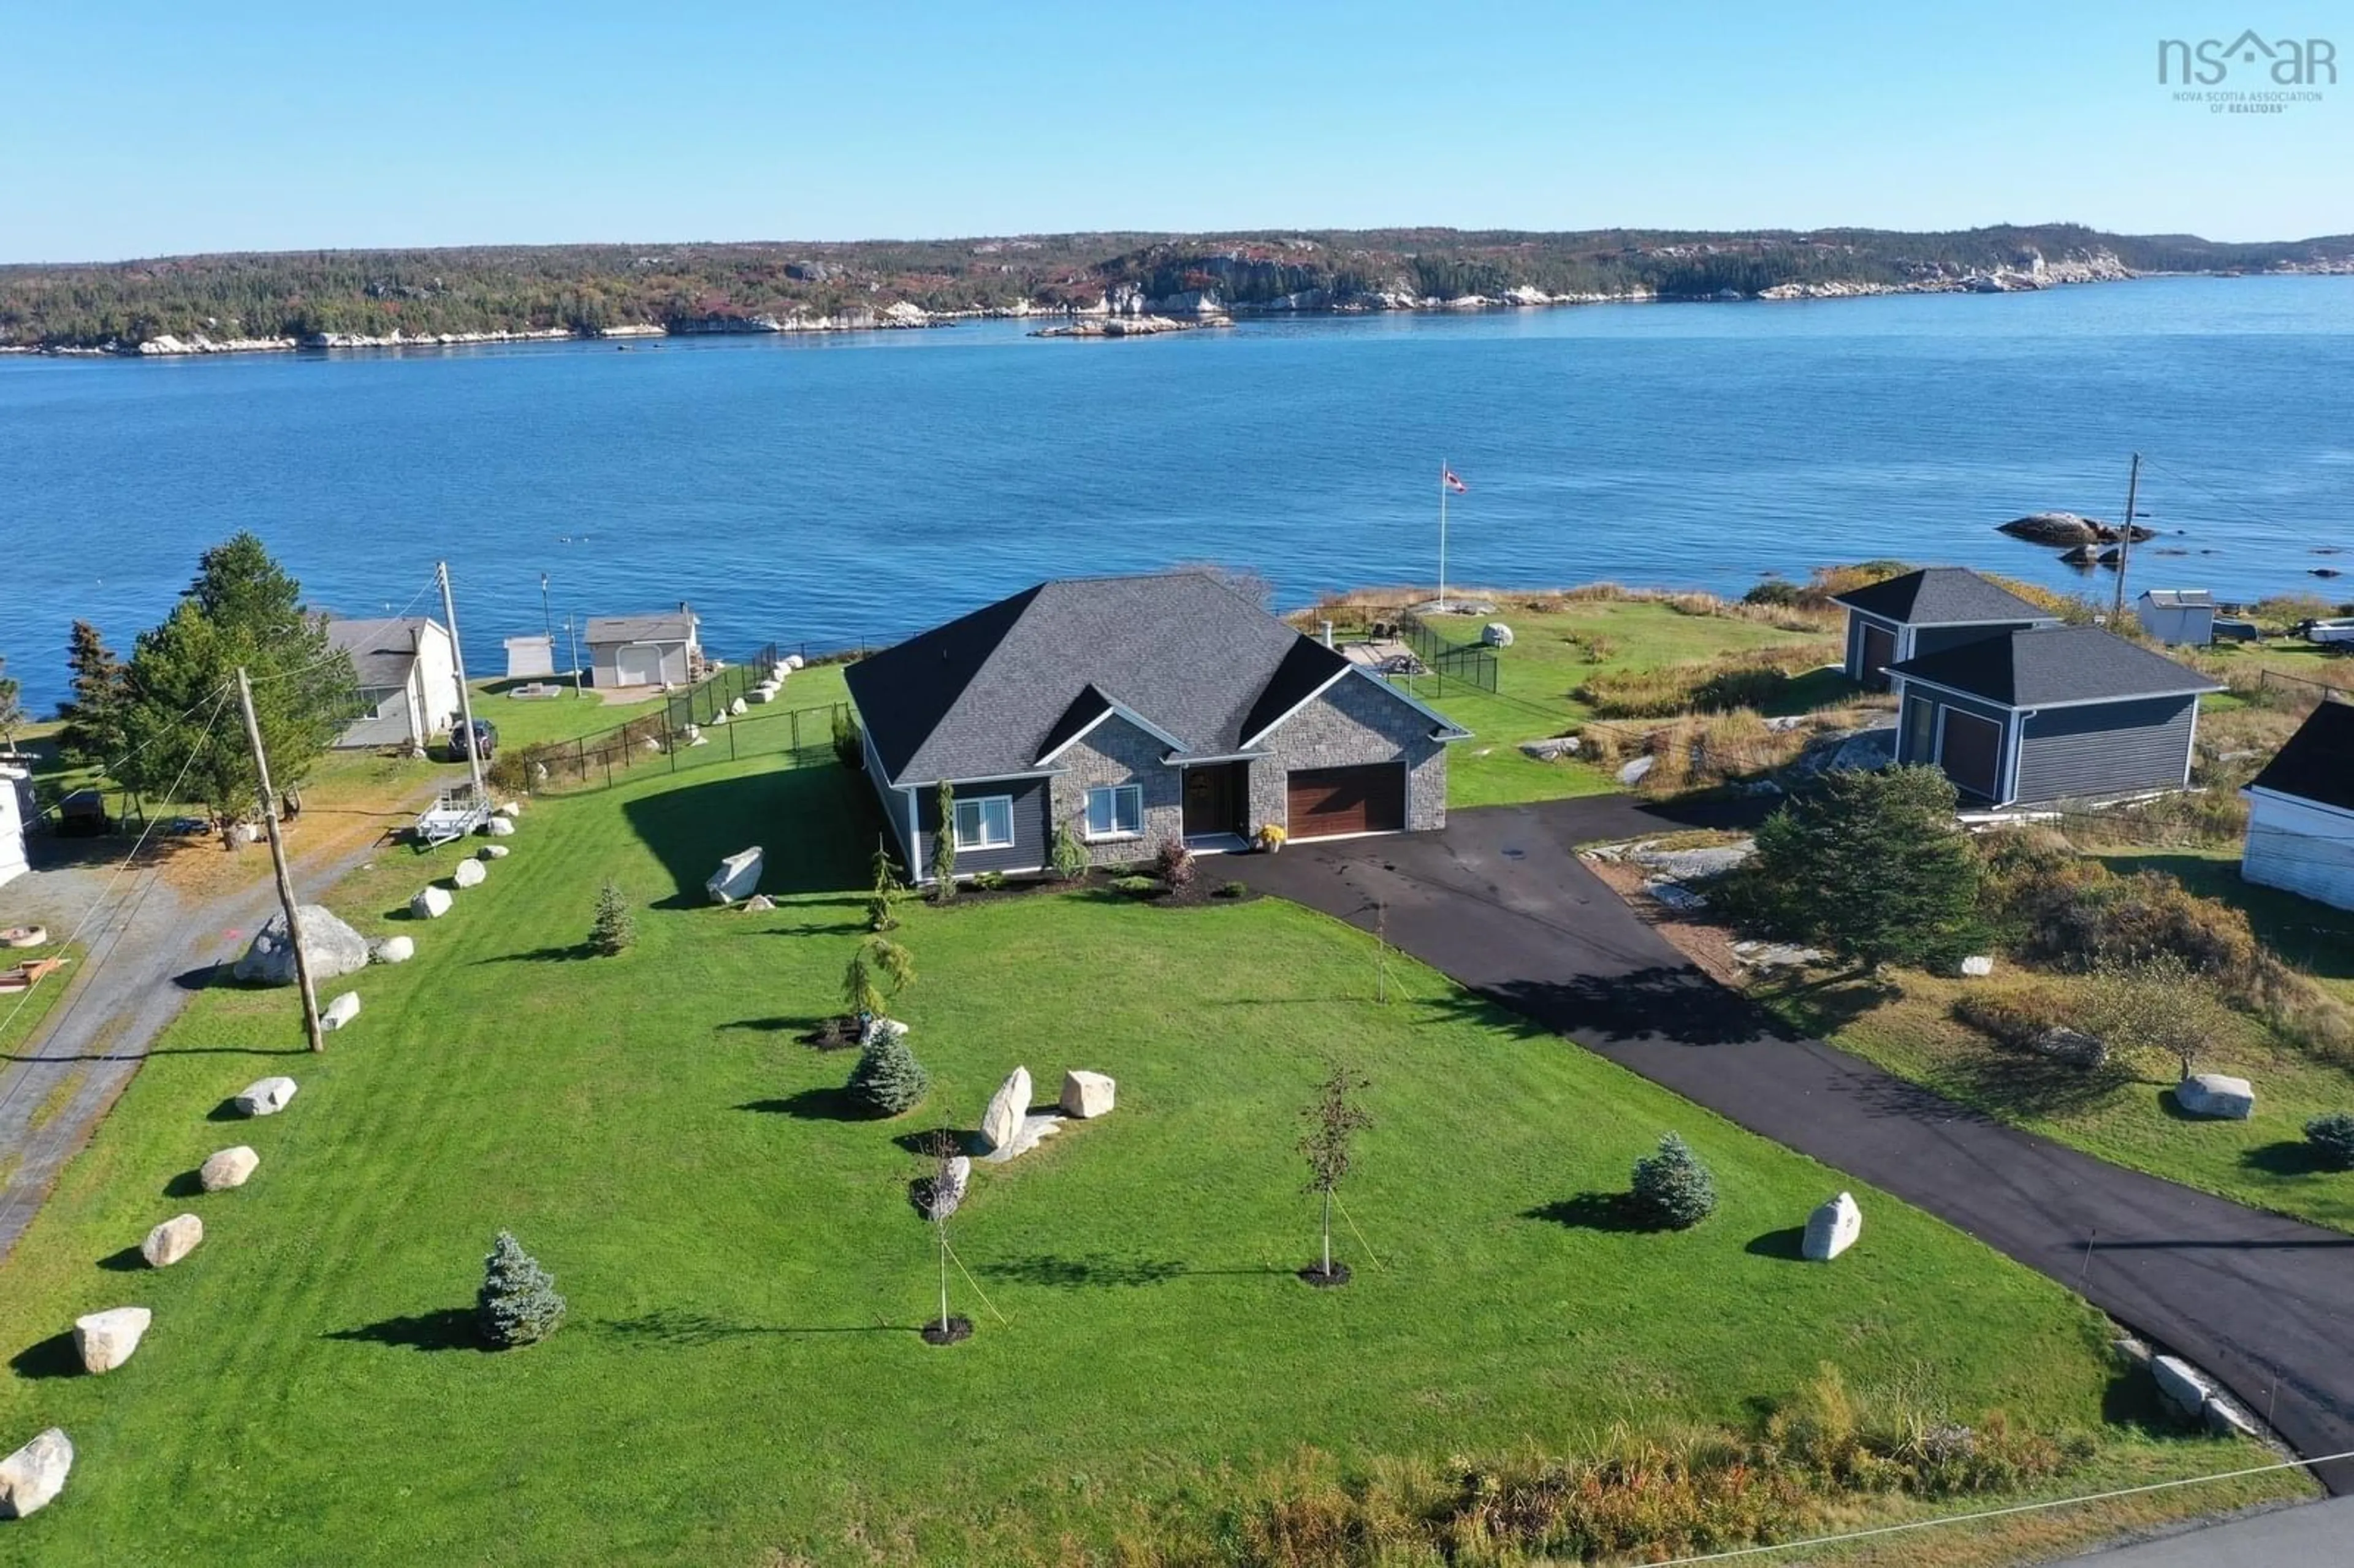 Home with stone exterior material for 21 Back Lane, Terence Bay Nova Scotia B3T 1Y3